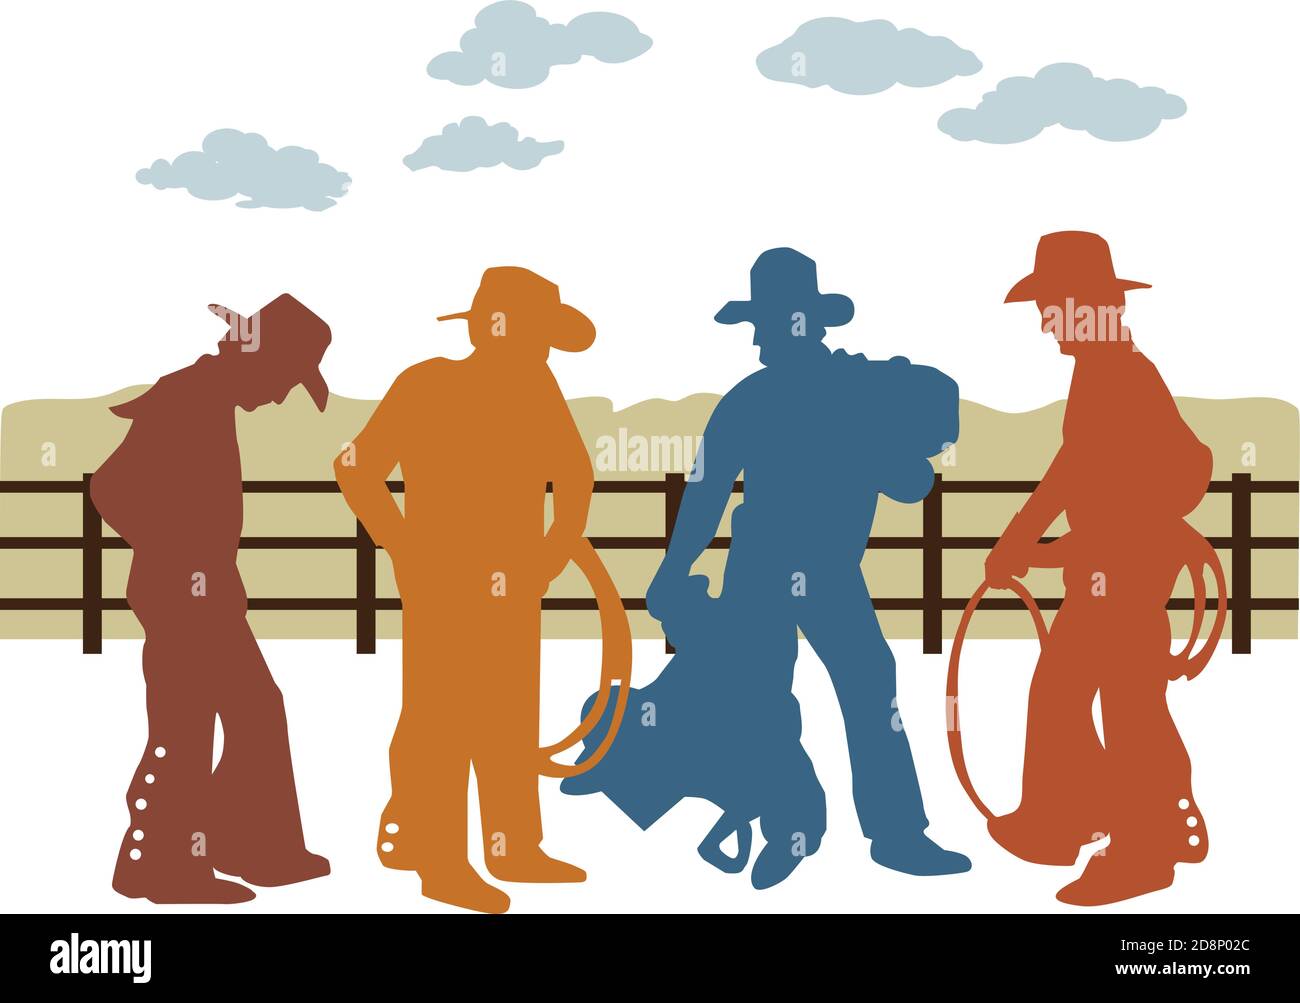 Colorful silhouette of cowboys, fence, and clouds. Stock Vector